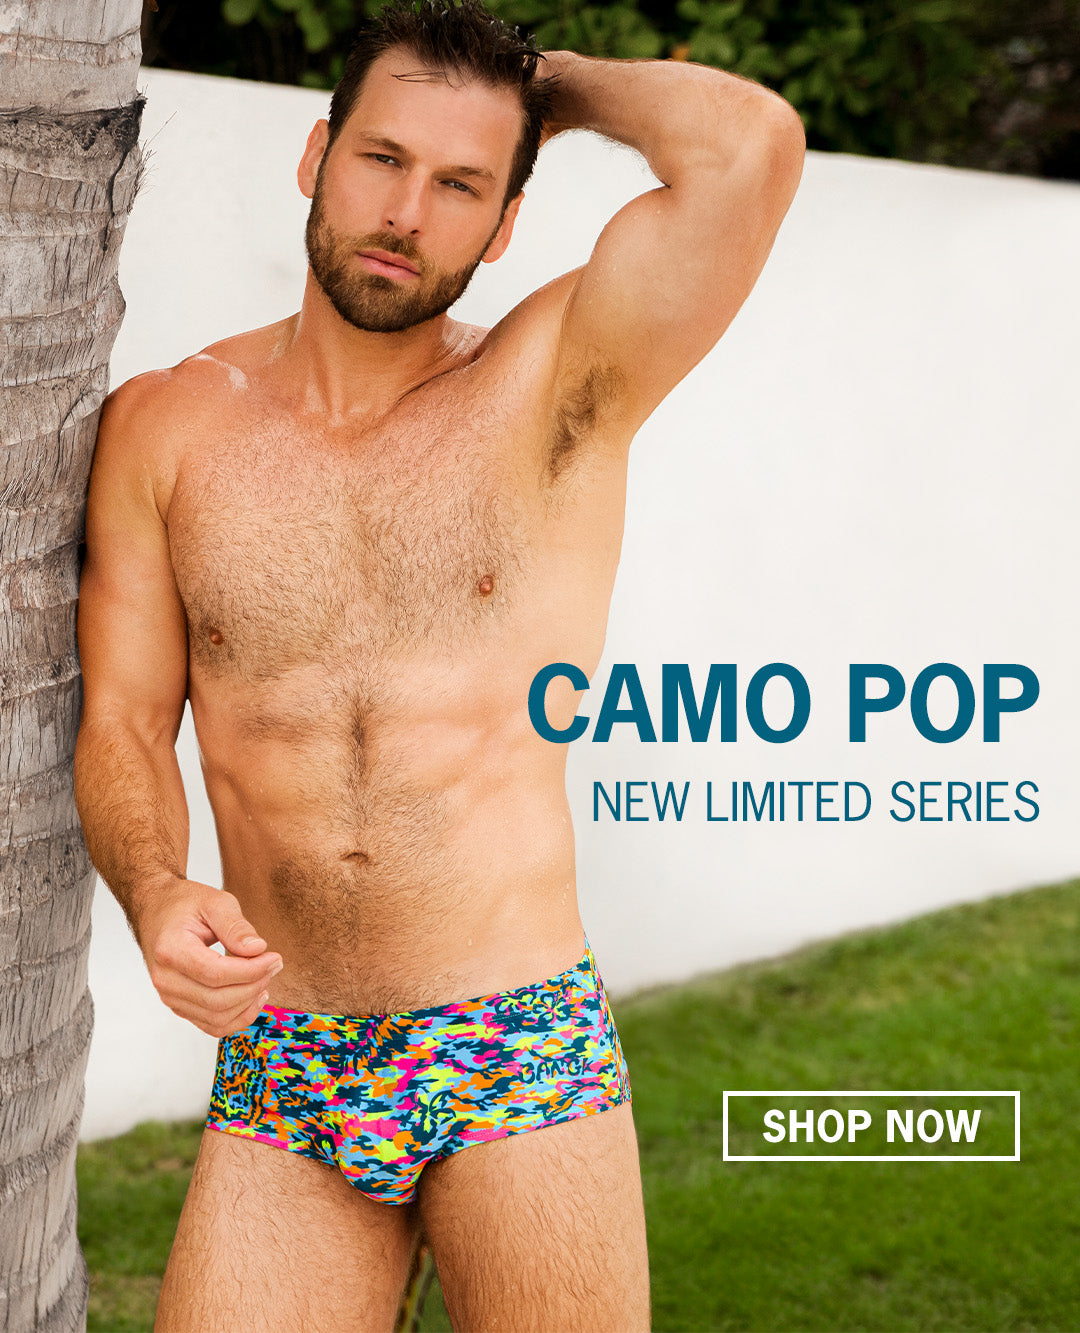 The new CAMO POP Beachwear Series for men, featuring camouflage print in sunshine-friendly bright popping colors.